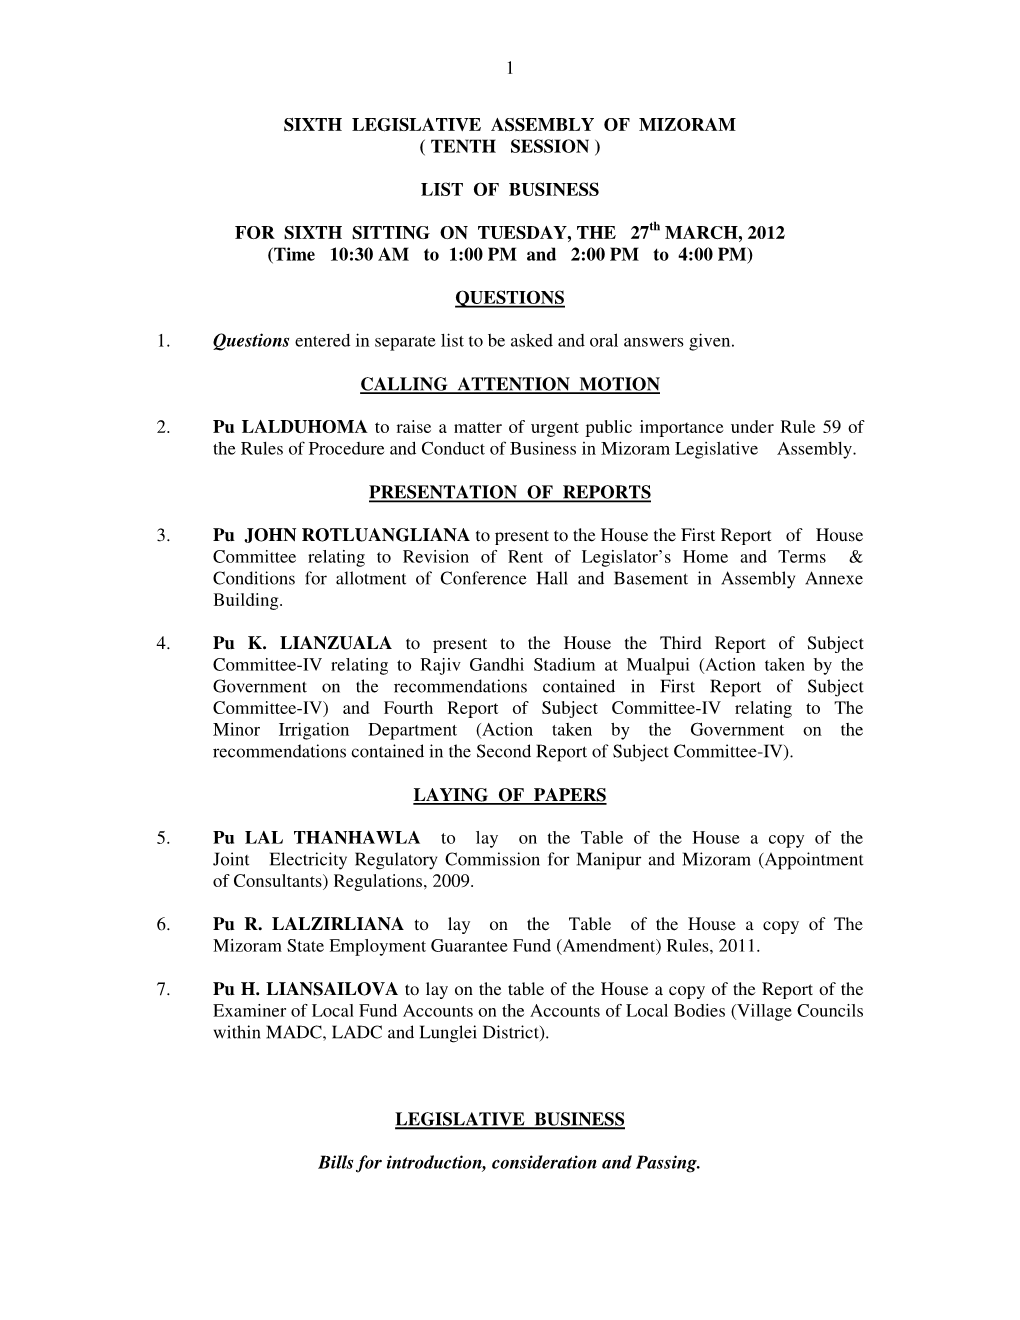 1 SIXTH LEGISLATIVE ASSEMBLY of MIZORAM ( TENTH SESSION ) LIST of BUSINESS for SIXTH SITTING on TUESDAY, the 27Th